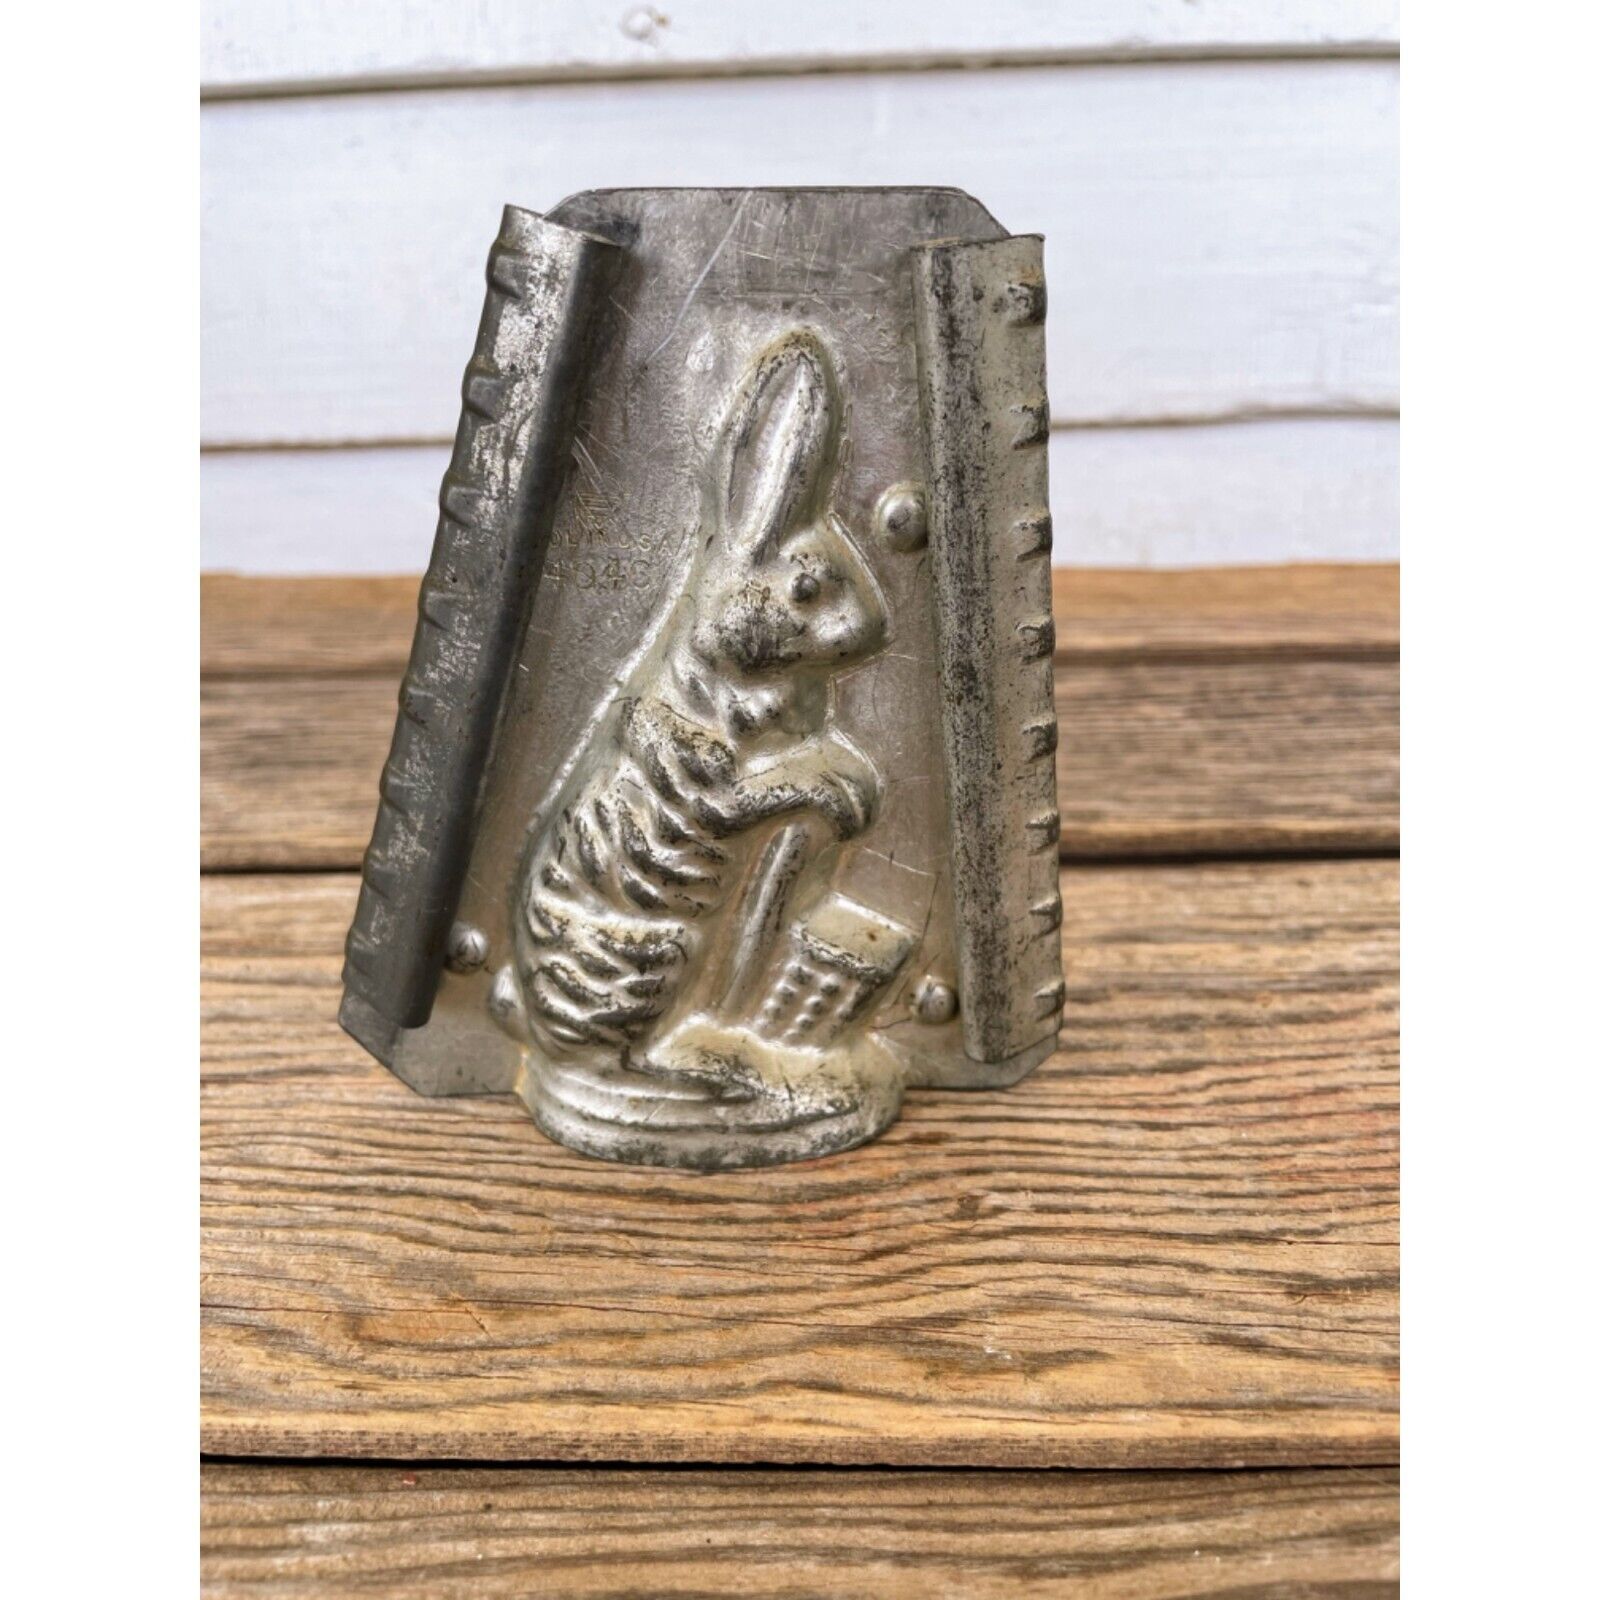 Vintage Eppelsheimer Standing Rabbit with basket Chocolate Candy Mold